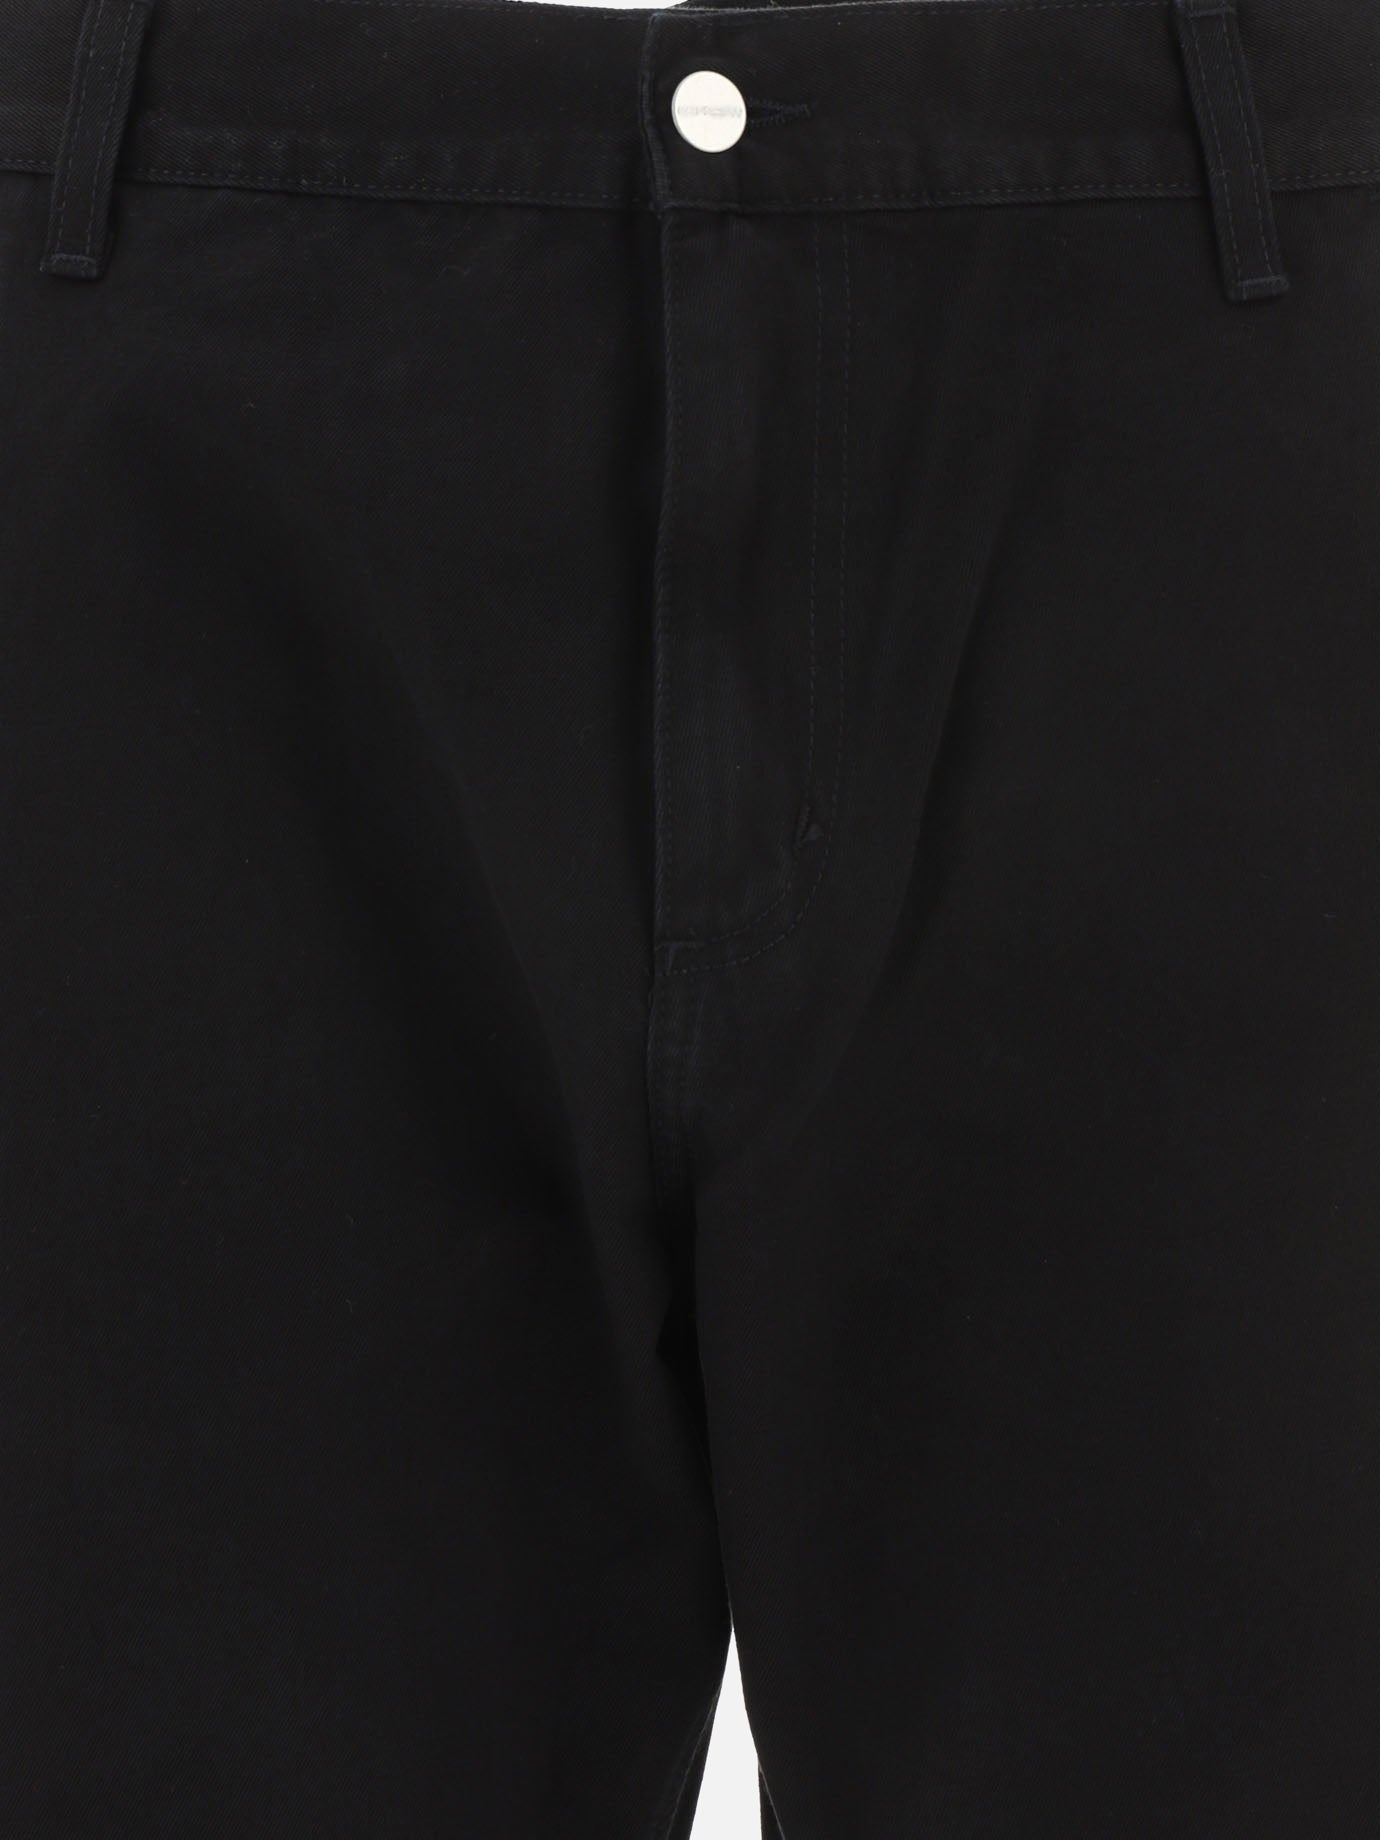 "Ruck Single Knee" trousers